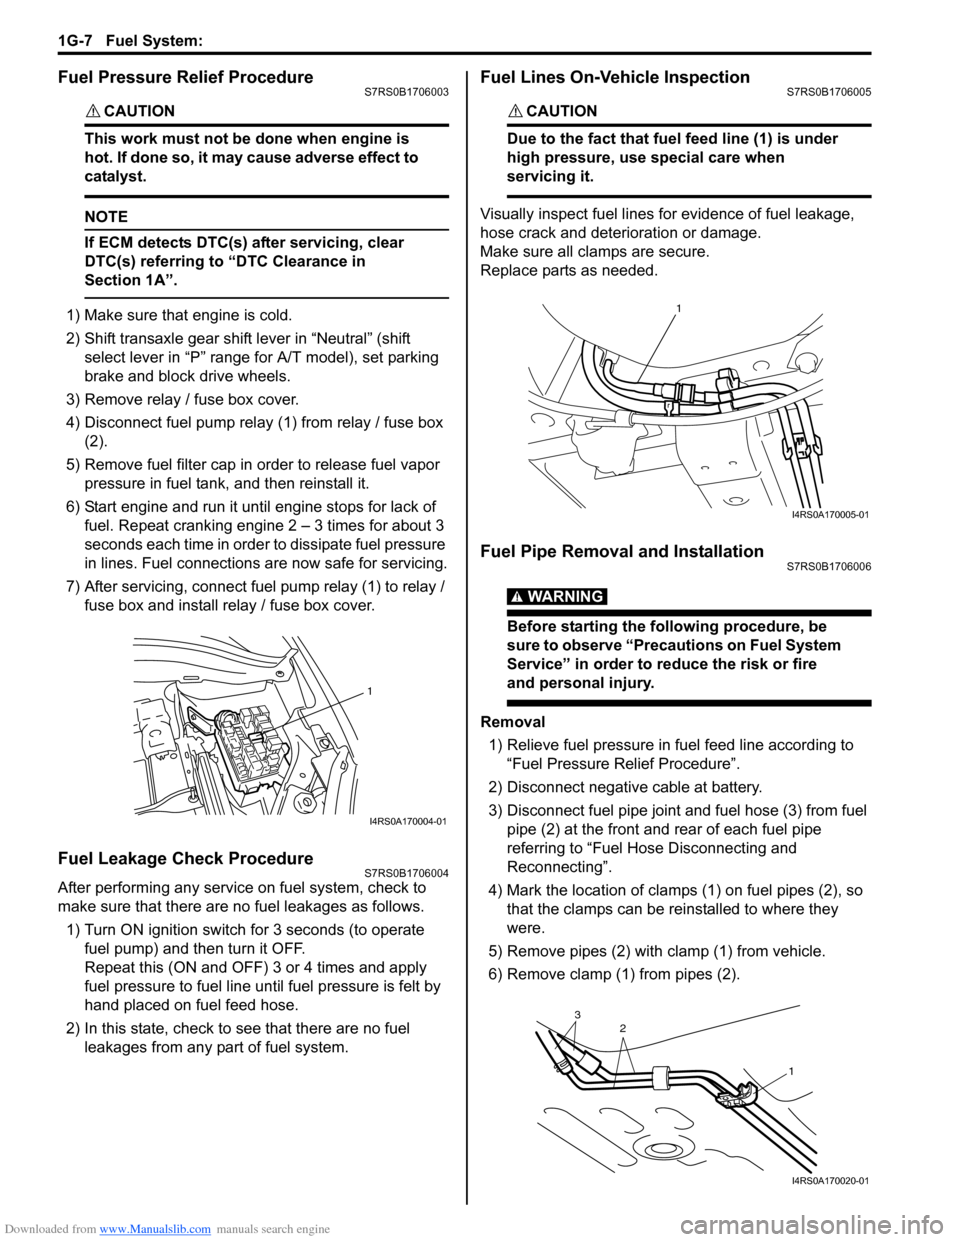 SUZUKI SWIFT 2006 2.G Service Service Manual Downloaded from www.Manualslib.com manuals search engine 1G-7 Fuel System: 
Fuel Pressure Relief ProcedureS7RS0B1706003
CAUTION! 
This work must not be done when engine is 
hot. If done so, it may cau